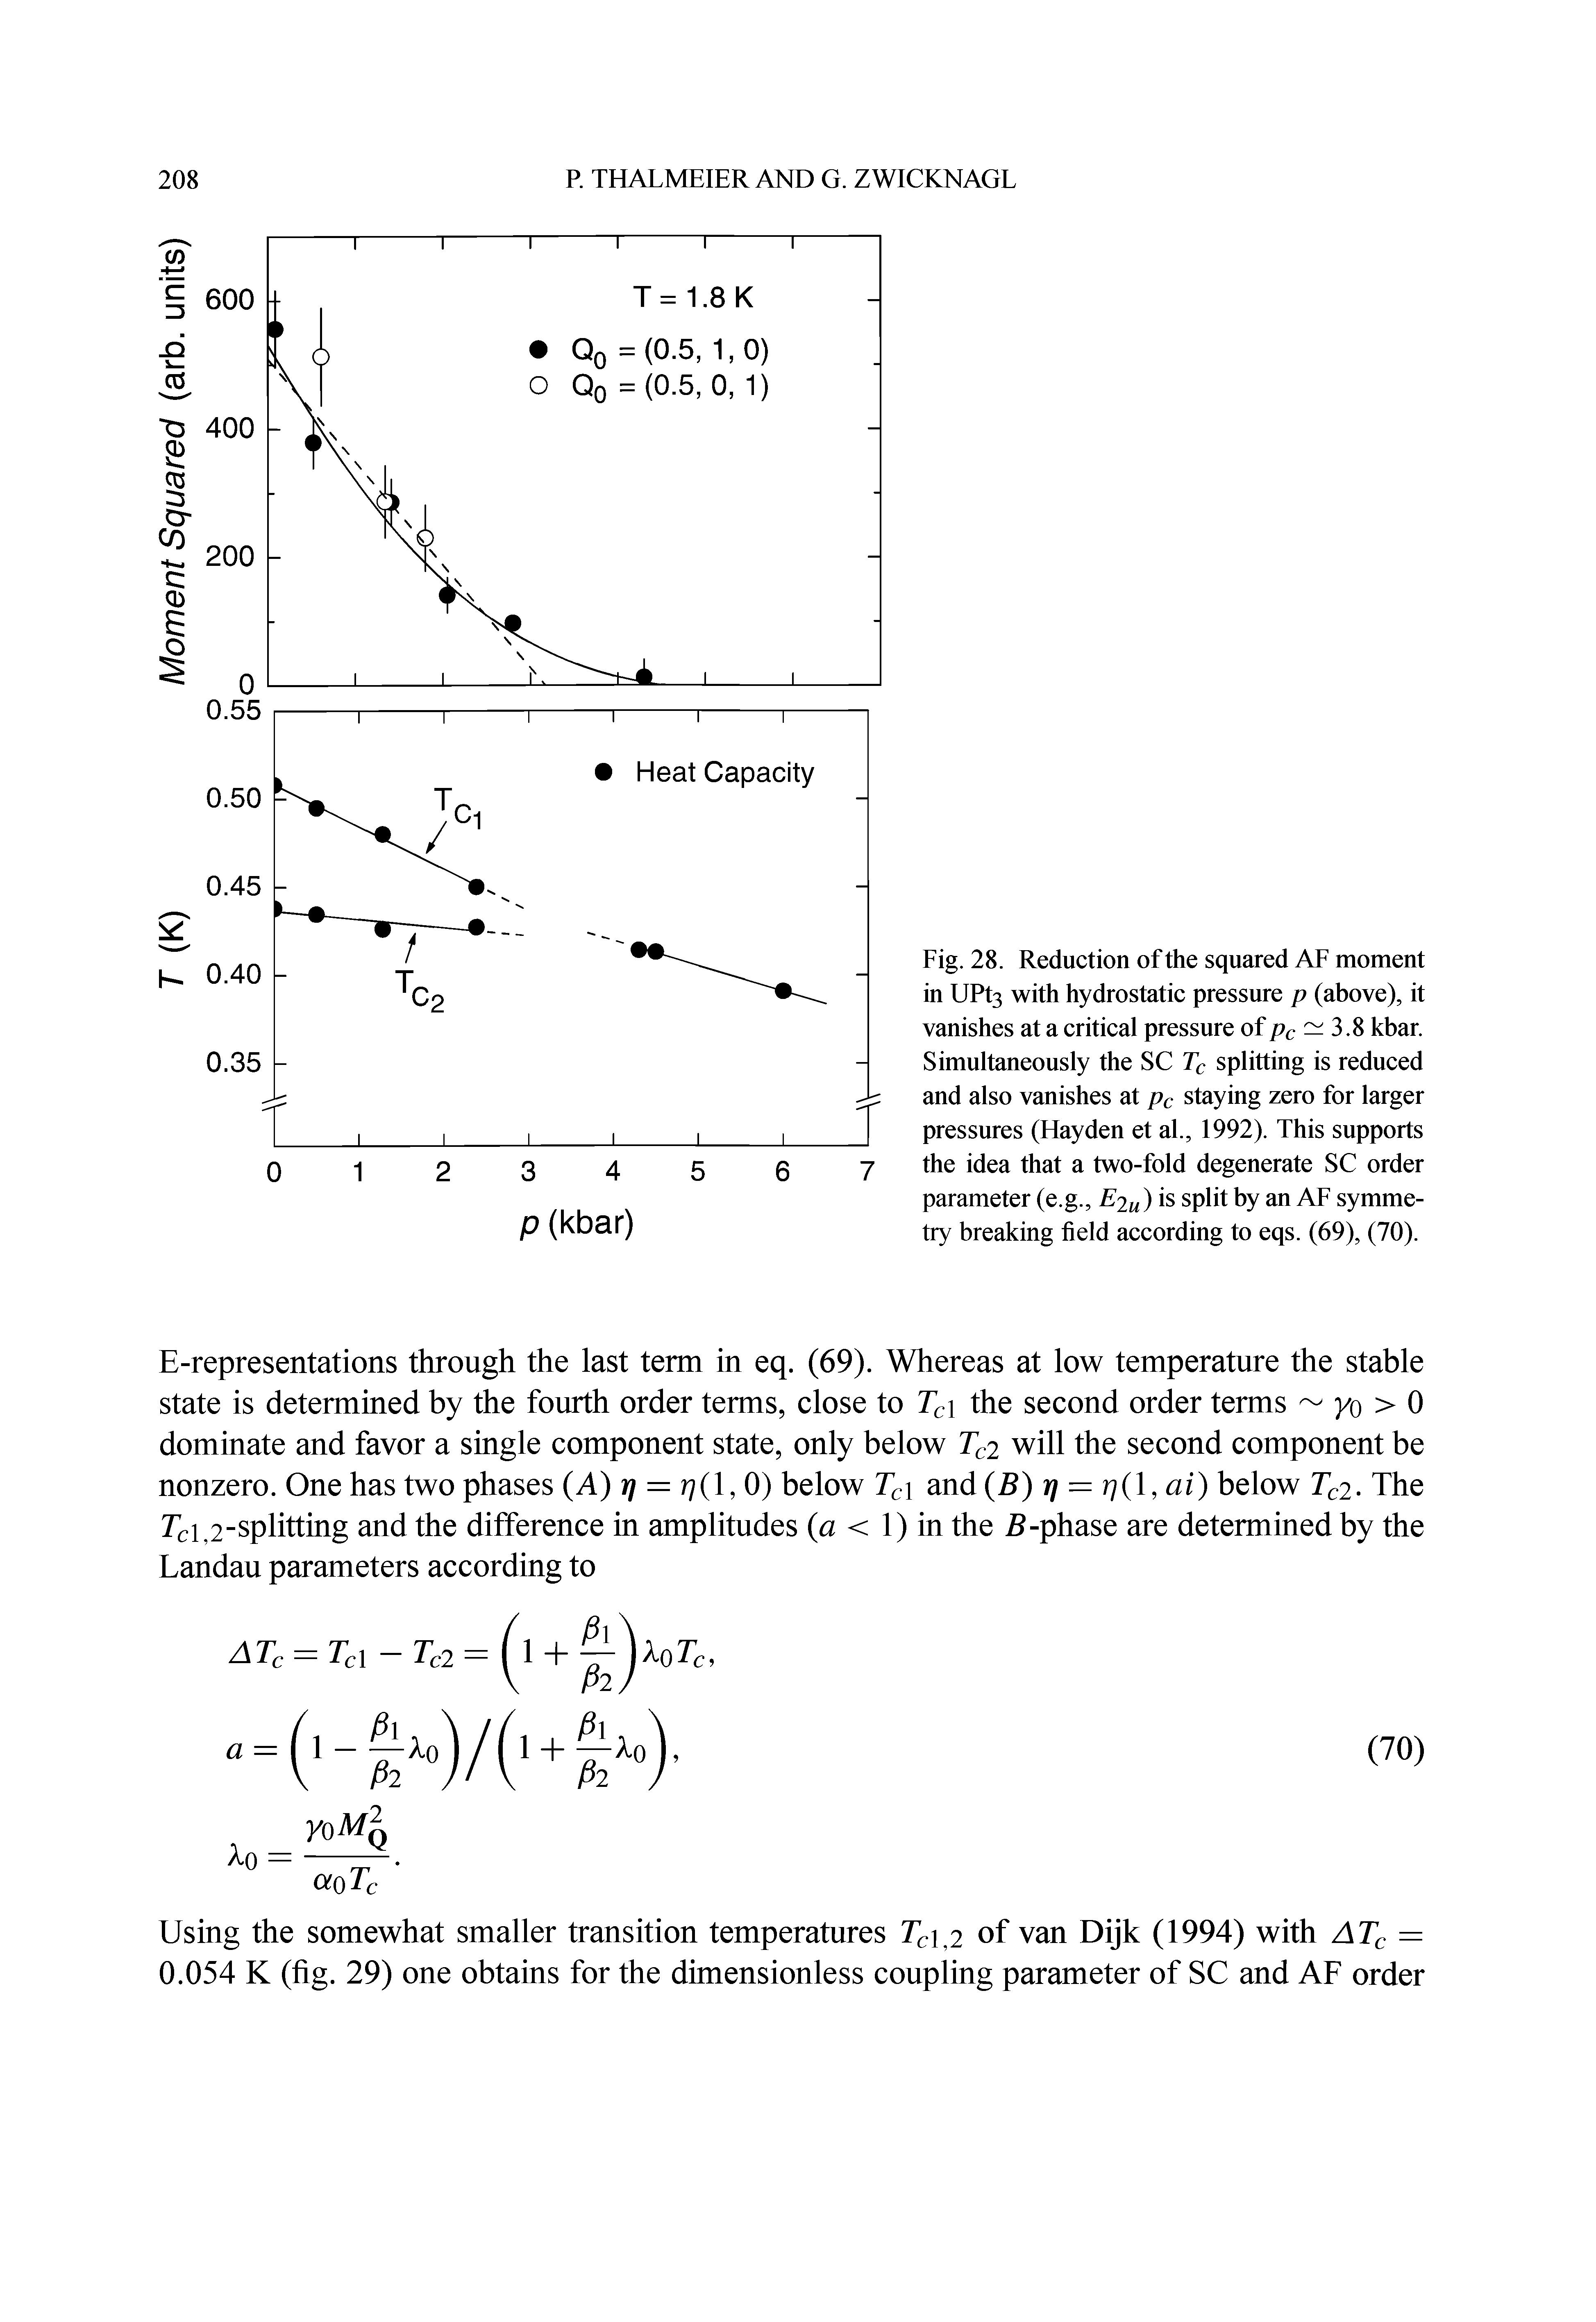 Fig. 28. Reduction of the squared AF moment in UPt3 with hydrostatic pressure p (above), it vanishes at a critical pressure of — 3.8 kbar. Simultaneously the SC Tq splitting is reduced and also vanishes at pc staying zero for larger pressures (Hayden et al., 1992). This supports the idea that a two-fold degenerate SC order parameter (e.g., E2m) is split by an AF symmetry breaking field according to eqs. (69), (70).